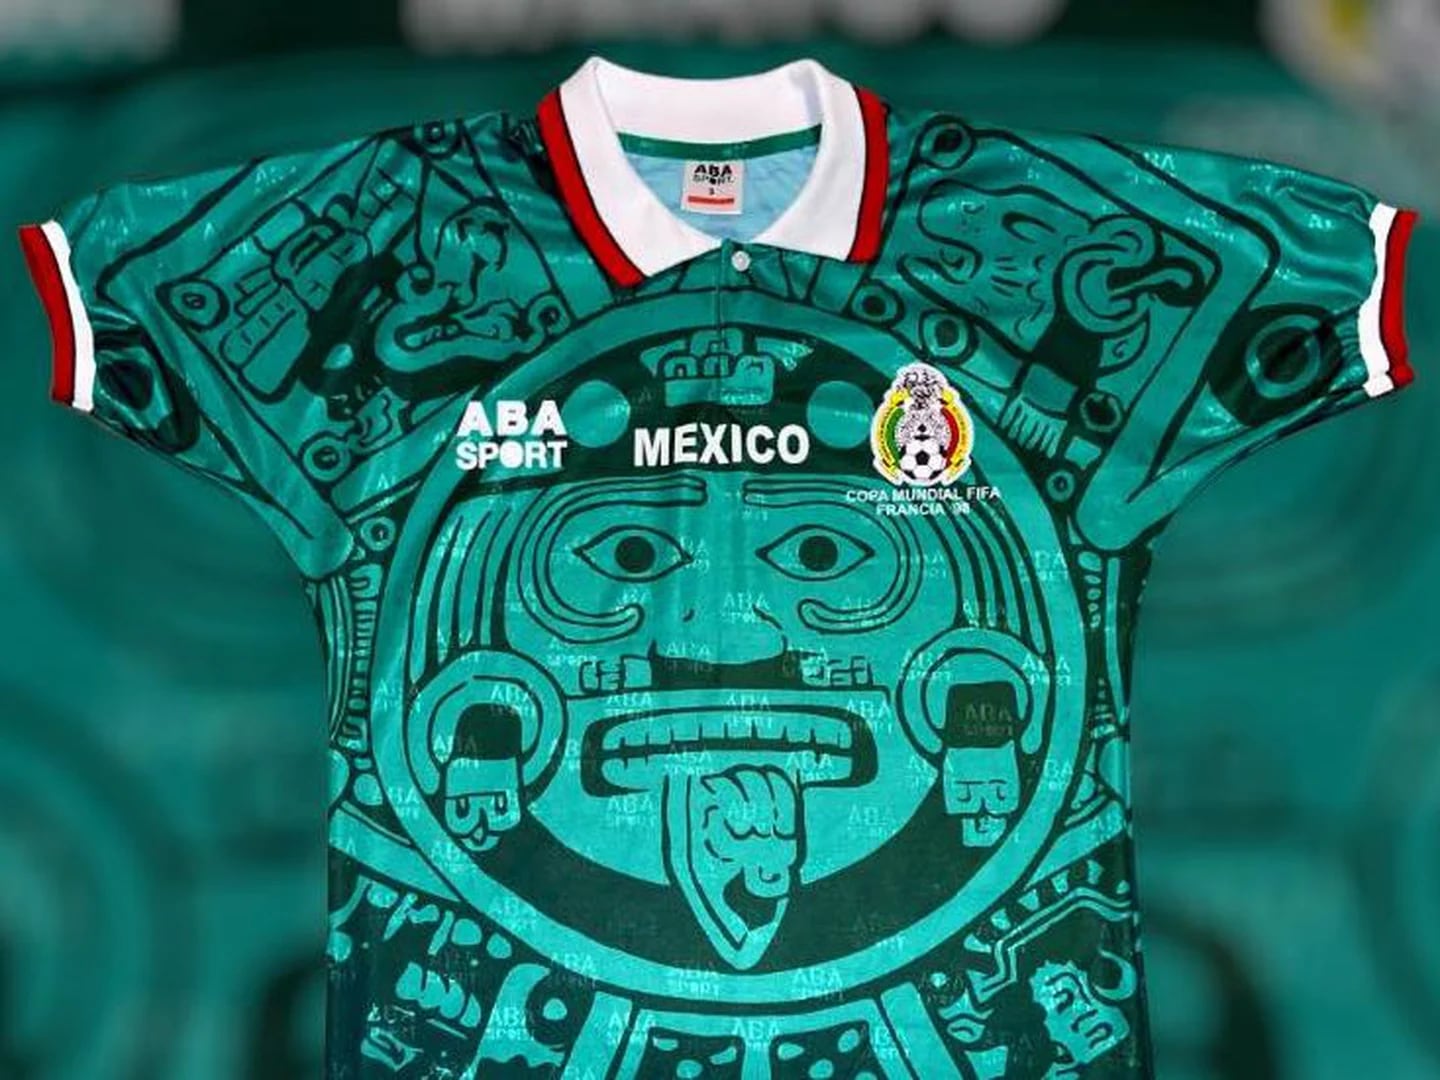 What Brands are Sponsoring Mexican Soccer (in Mexico)?